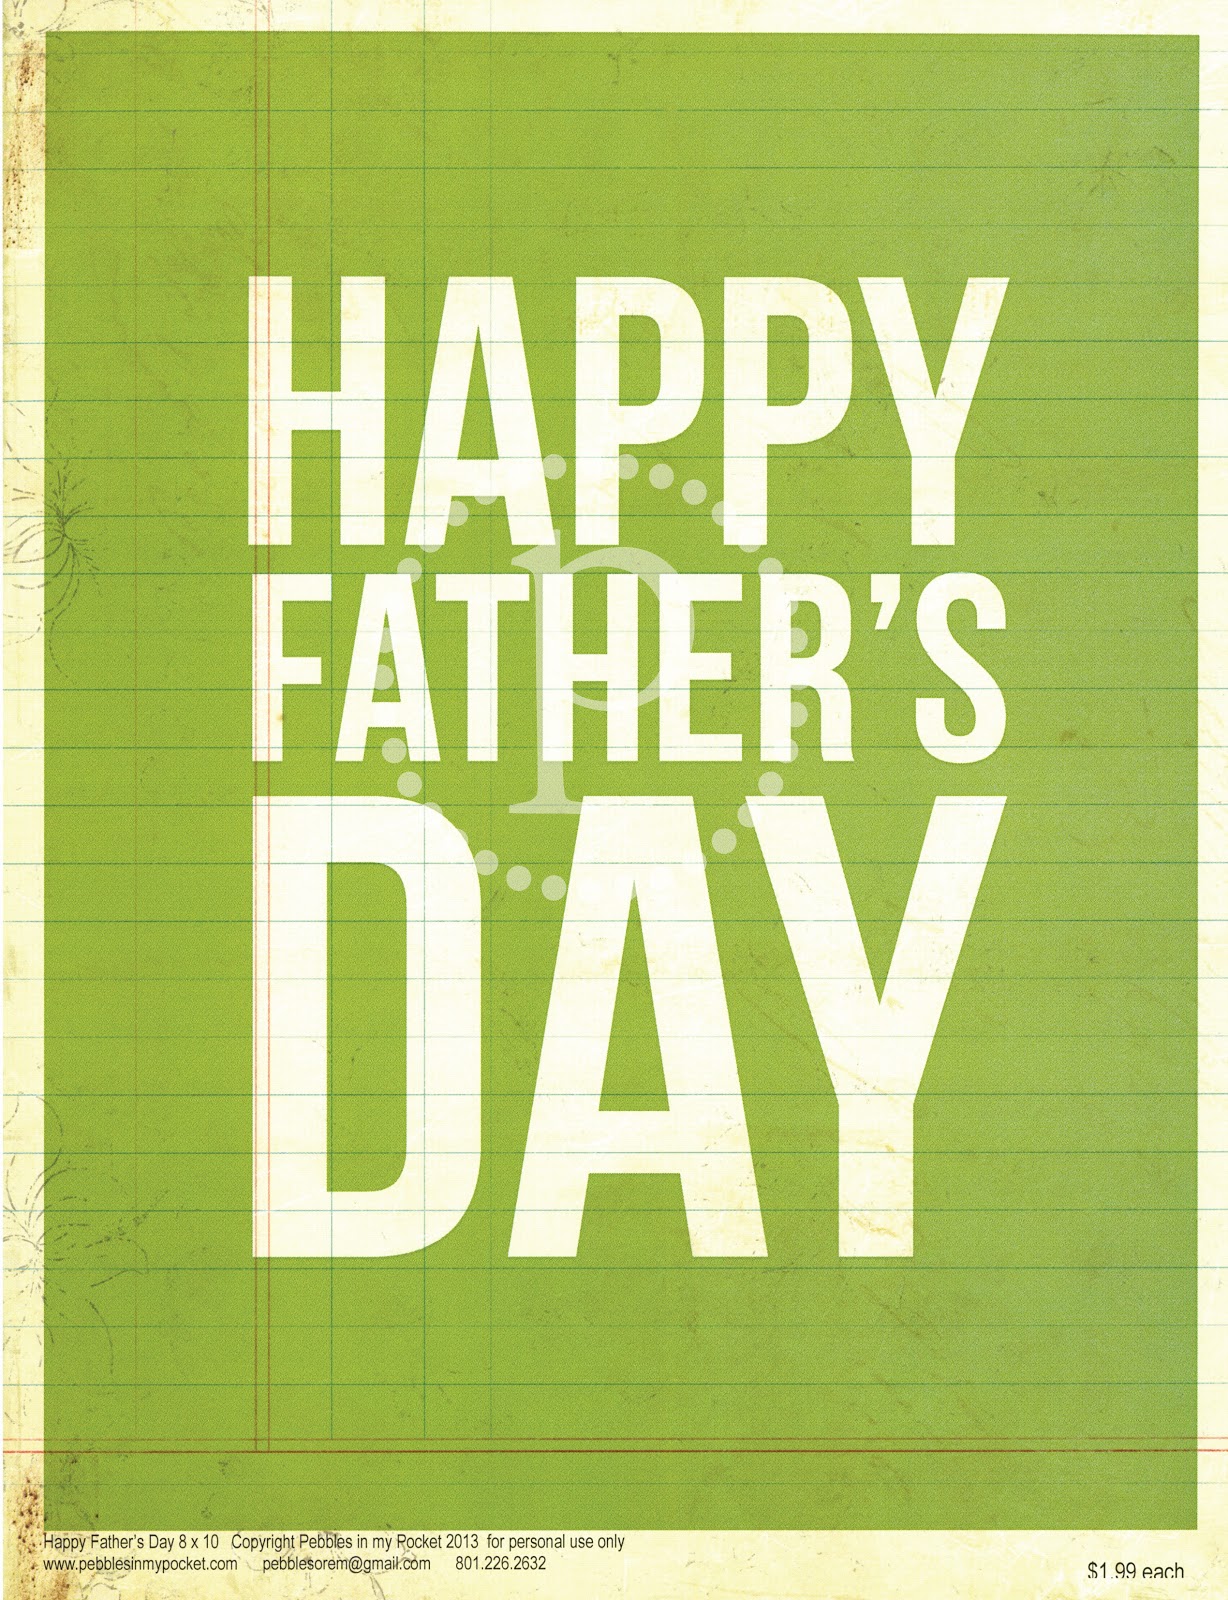 Pebbles In My Pocket Blog: father's day quotes